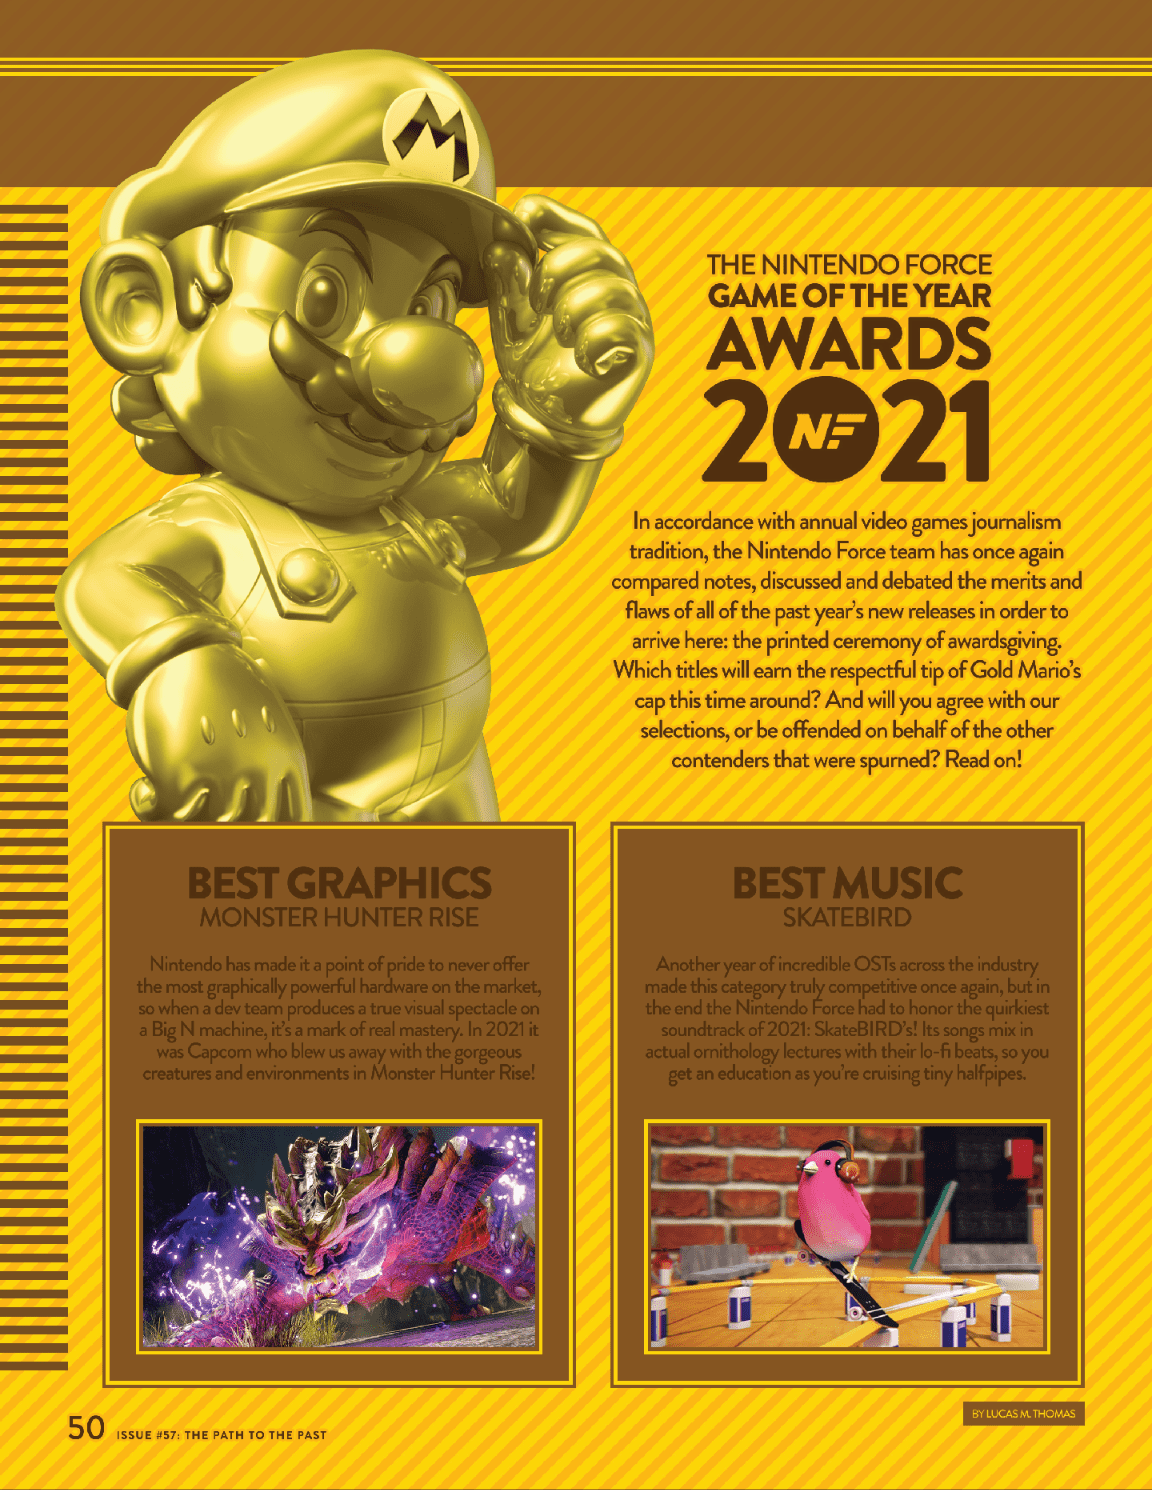 SkateBIRD wins Best Music at Nintendo Force's Game of the Year Awards!